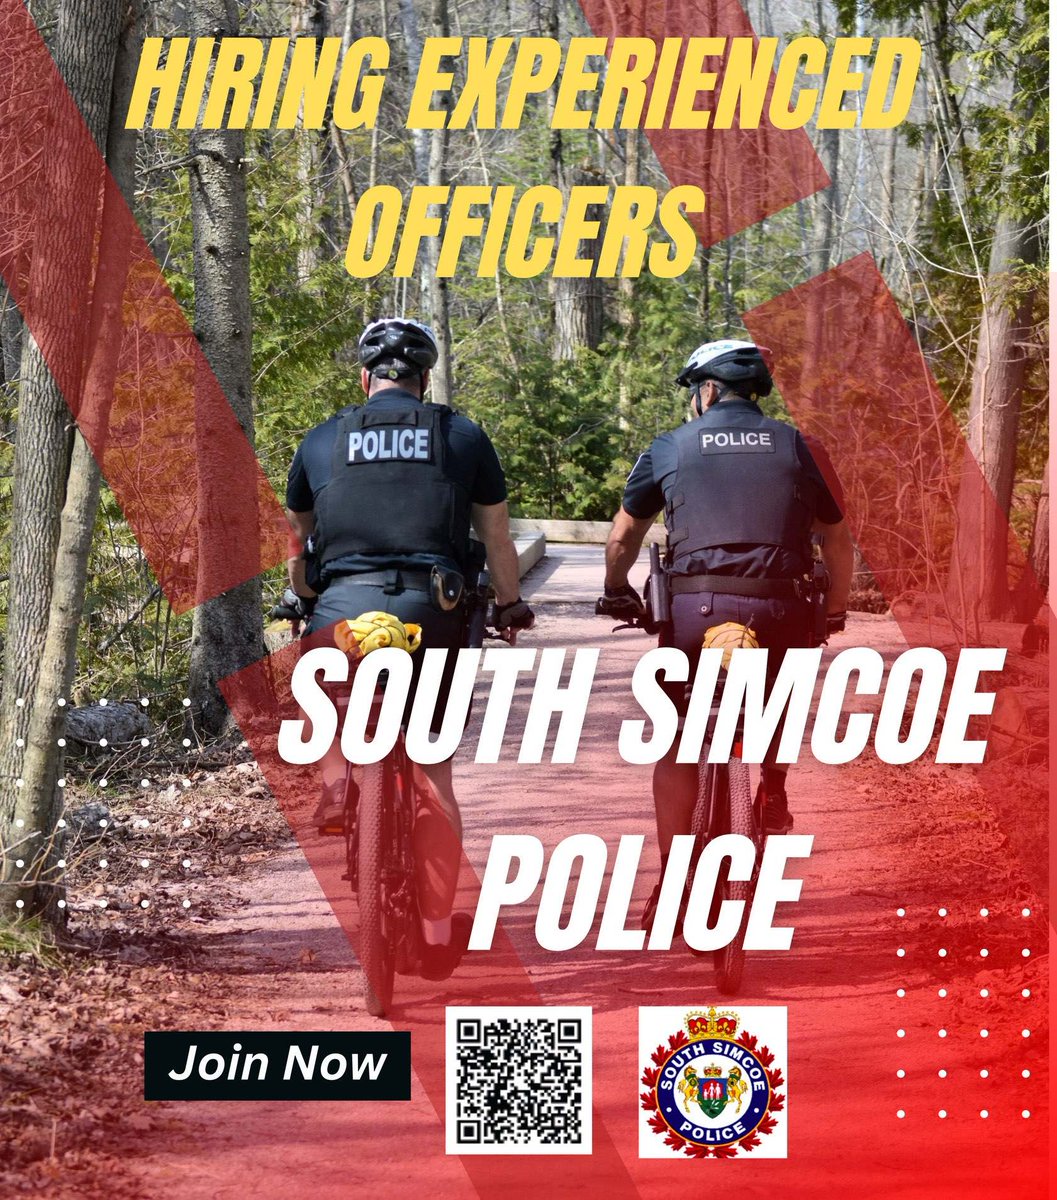 The South Simcoe Police Service is currently accepting applications for Experienced Police Officers. Apply now to be considered for our summer intake! #JoinSSPS